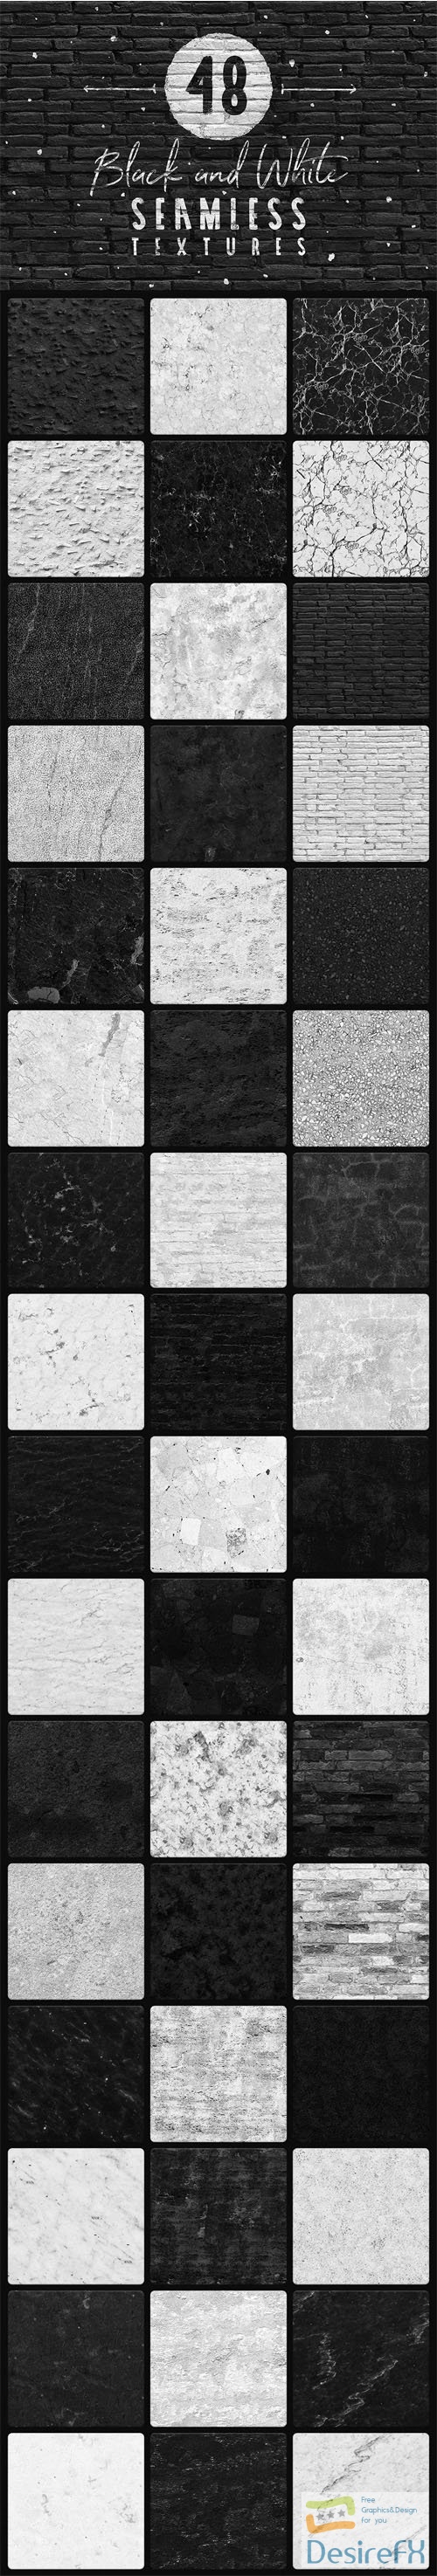 48 B/W Seamless Textures Collection